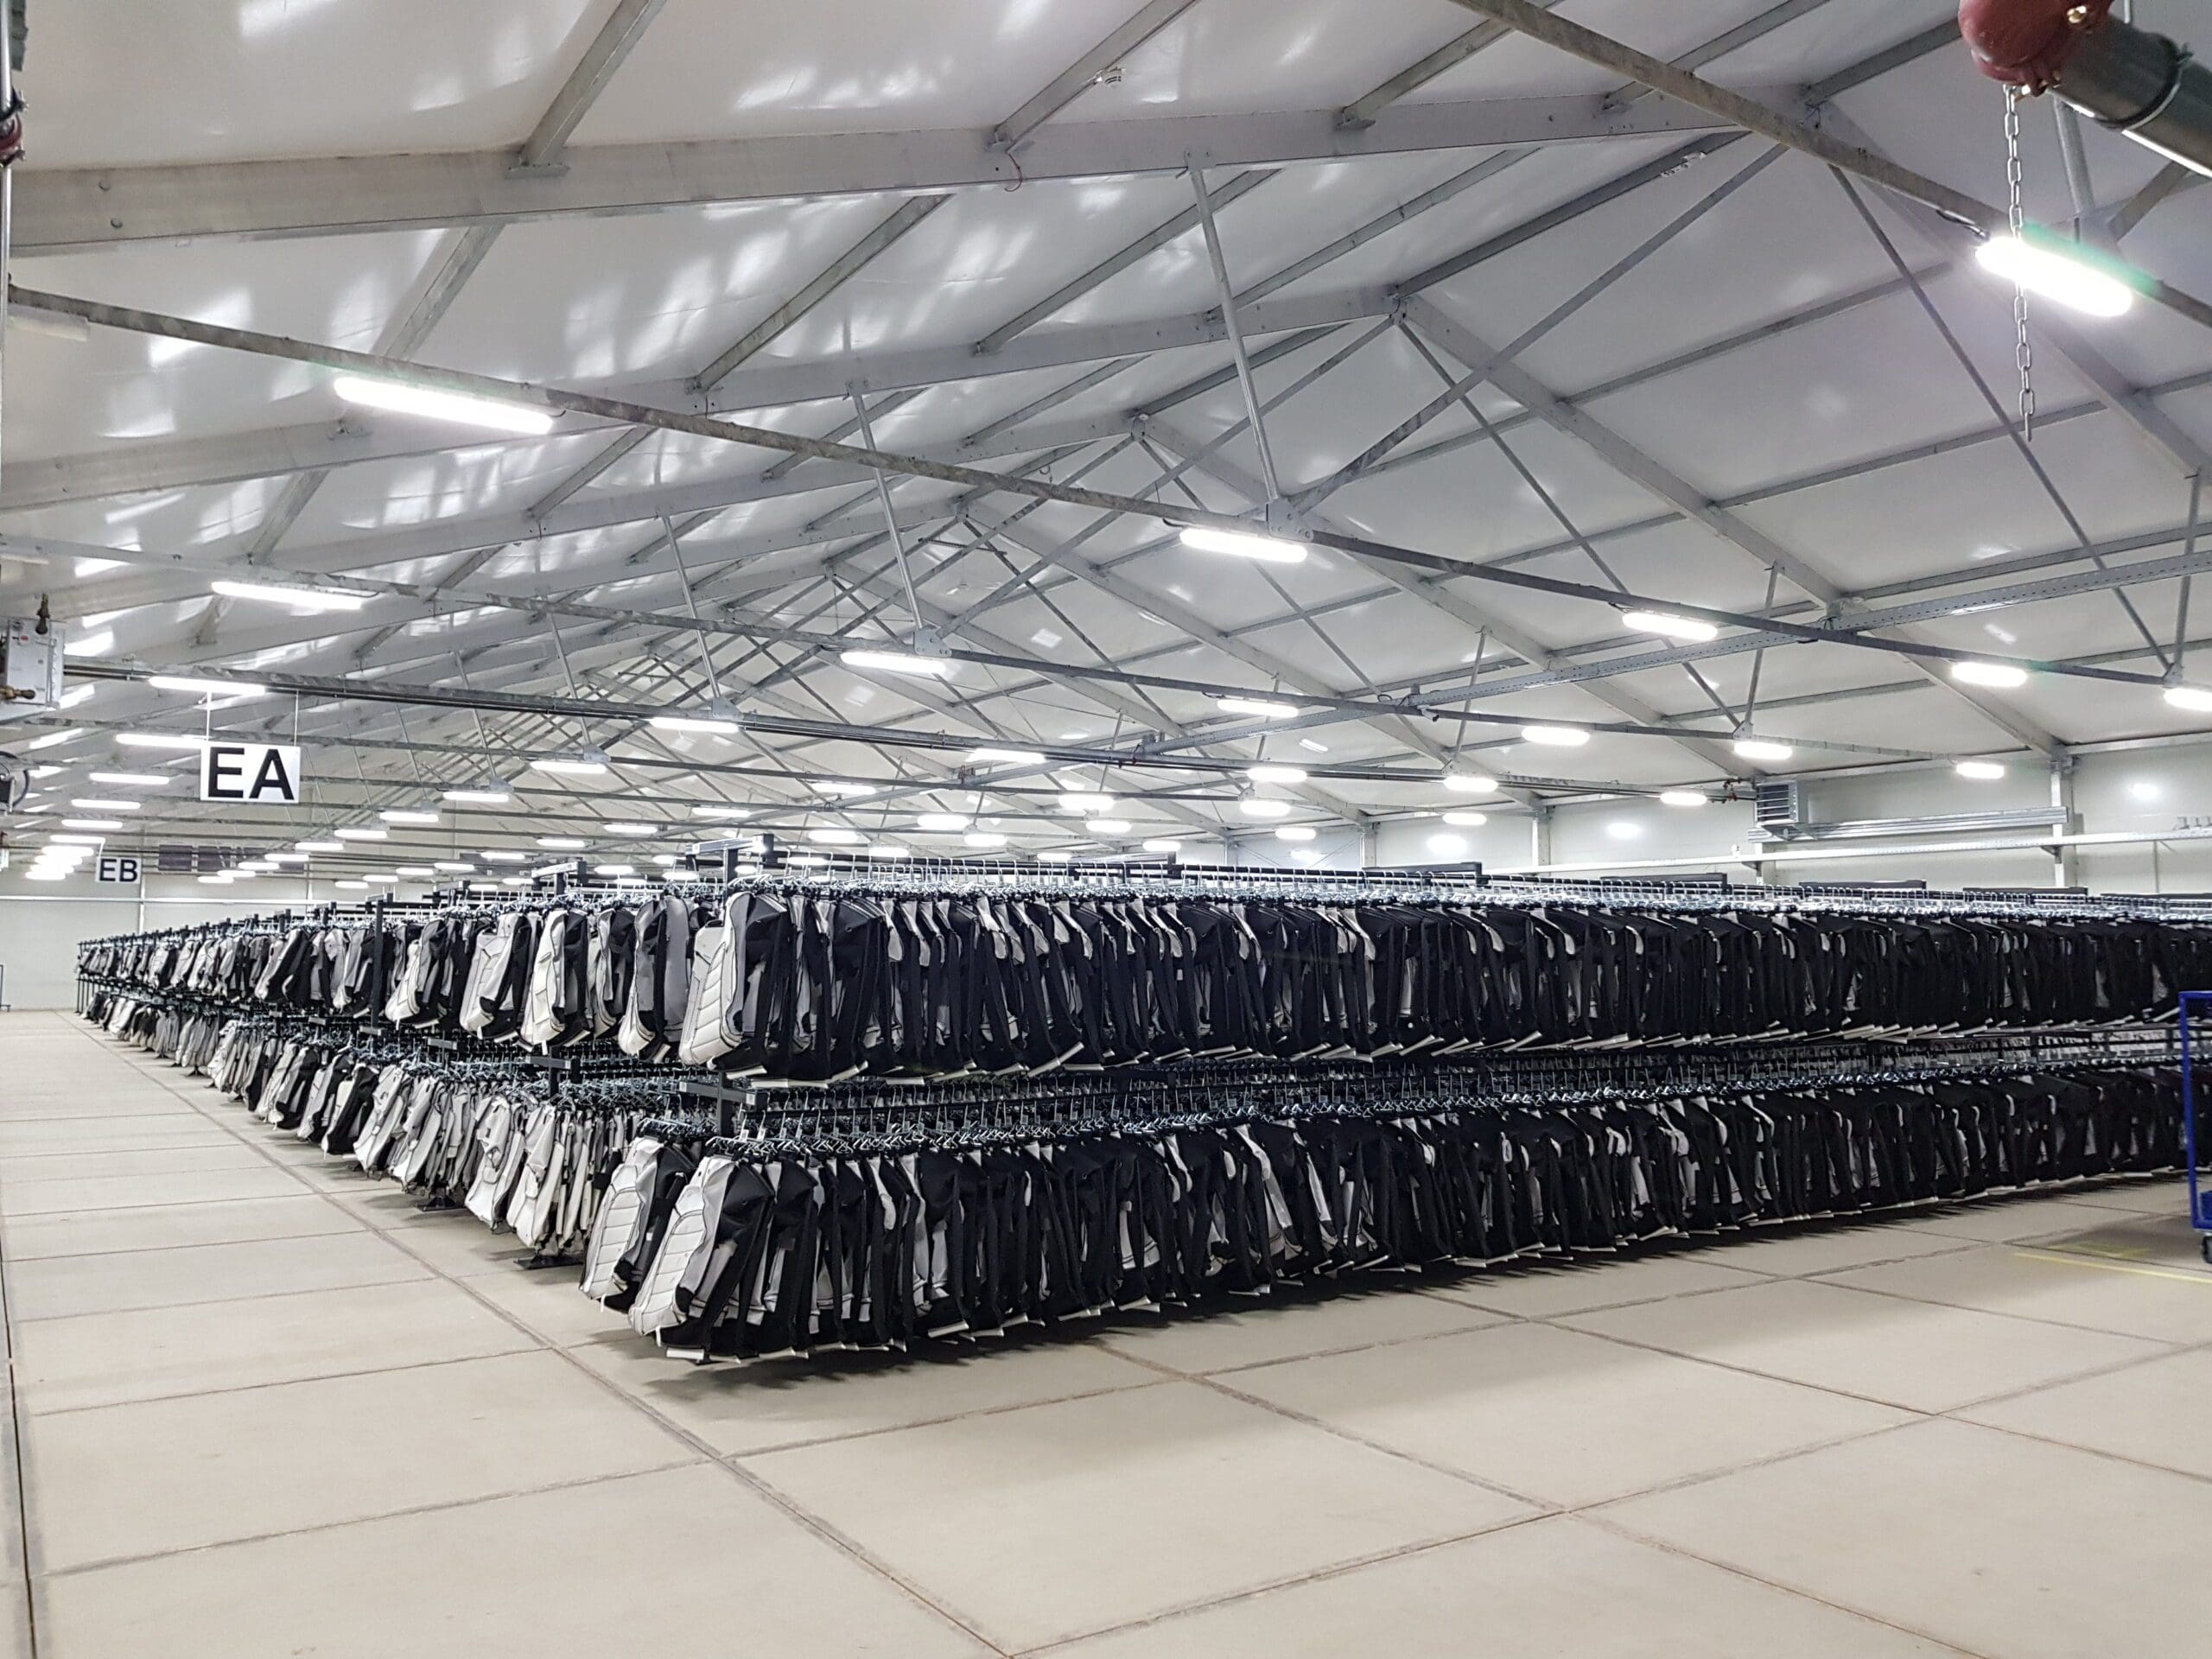 Volkswagen – Providing Insulated Industrial Structures for Seat Storage